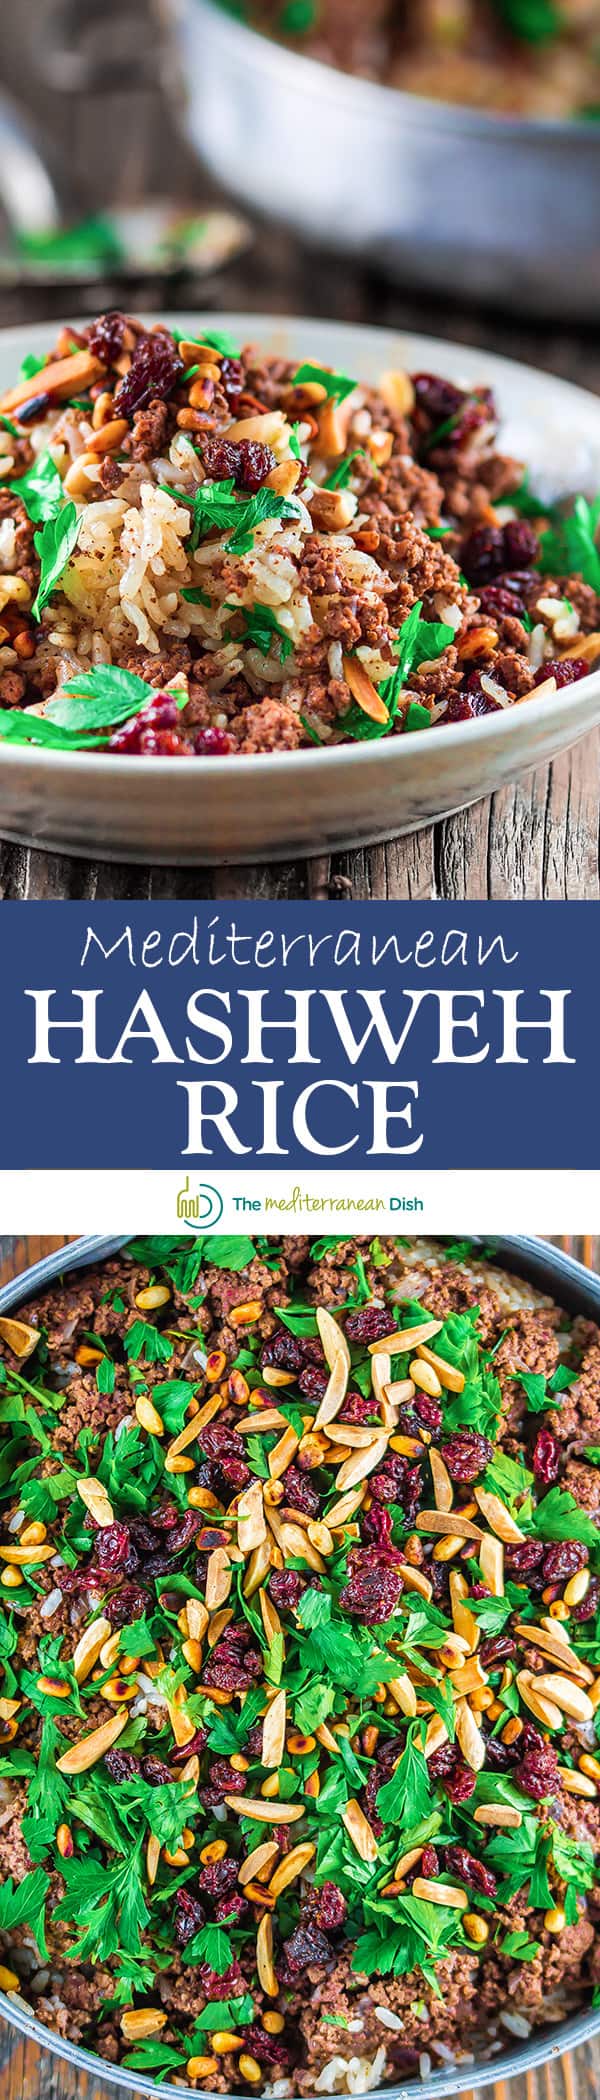 Mediterranean Hashweh Rice (Ground Beef and Rice) | The Mediterranean Dish. Spiced ground beef and rice with nuts and raisins. Exceptional rice pilaf; you will want seconds!